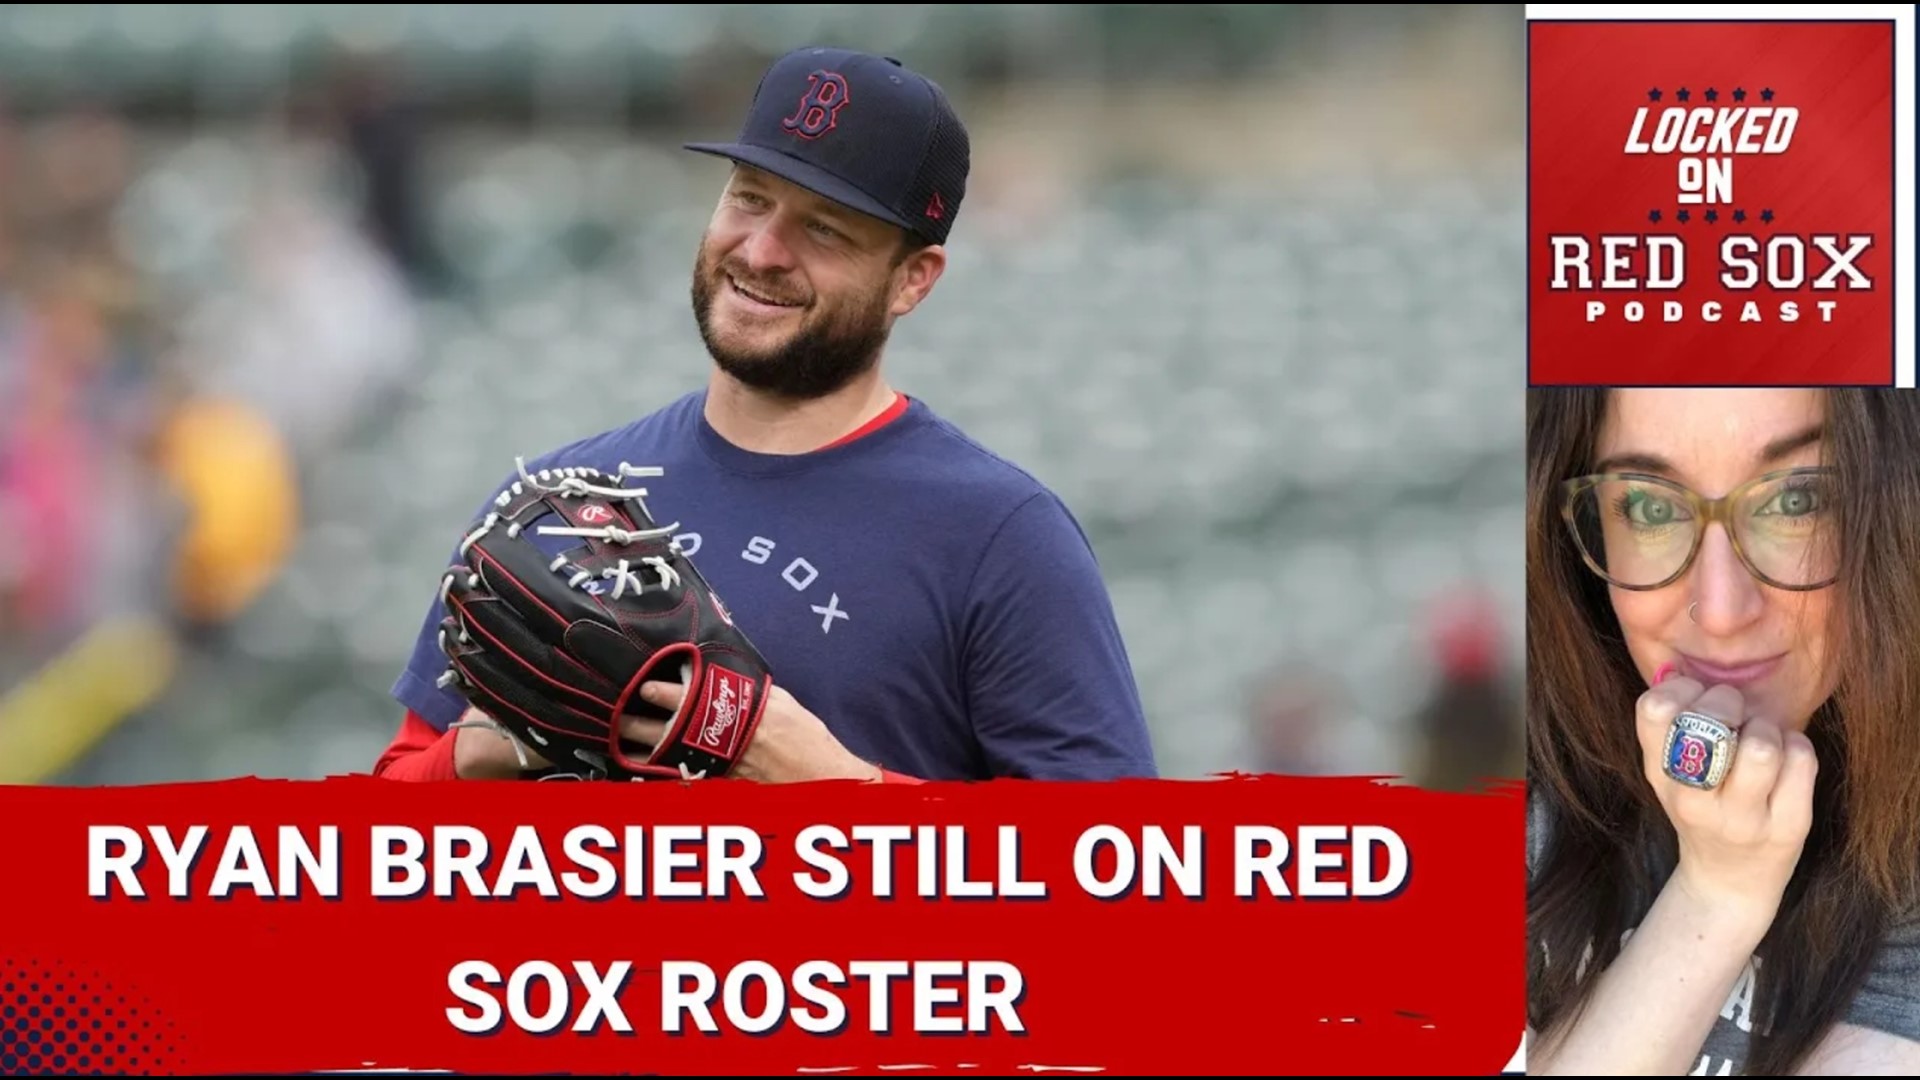 The MLB non-tender deadline has come and gone and Ryan Brasier remains a member of the Boston Red Sox.